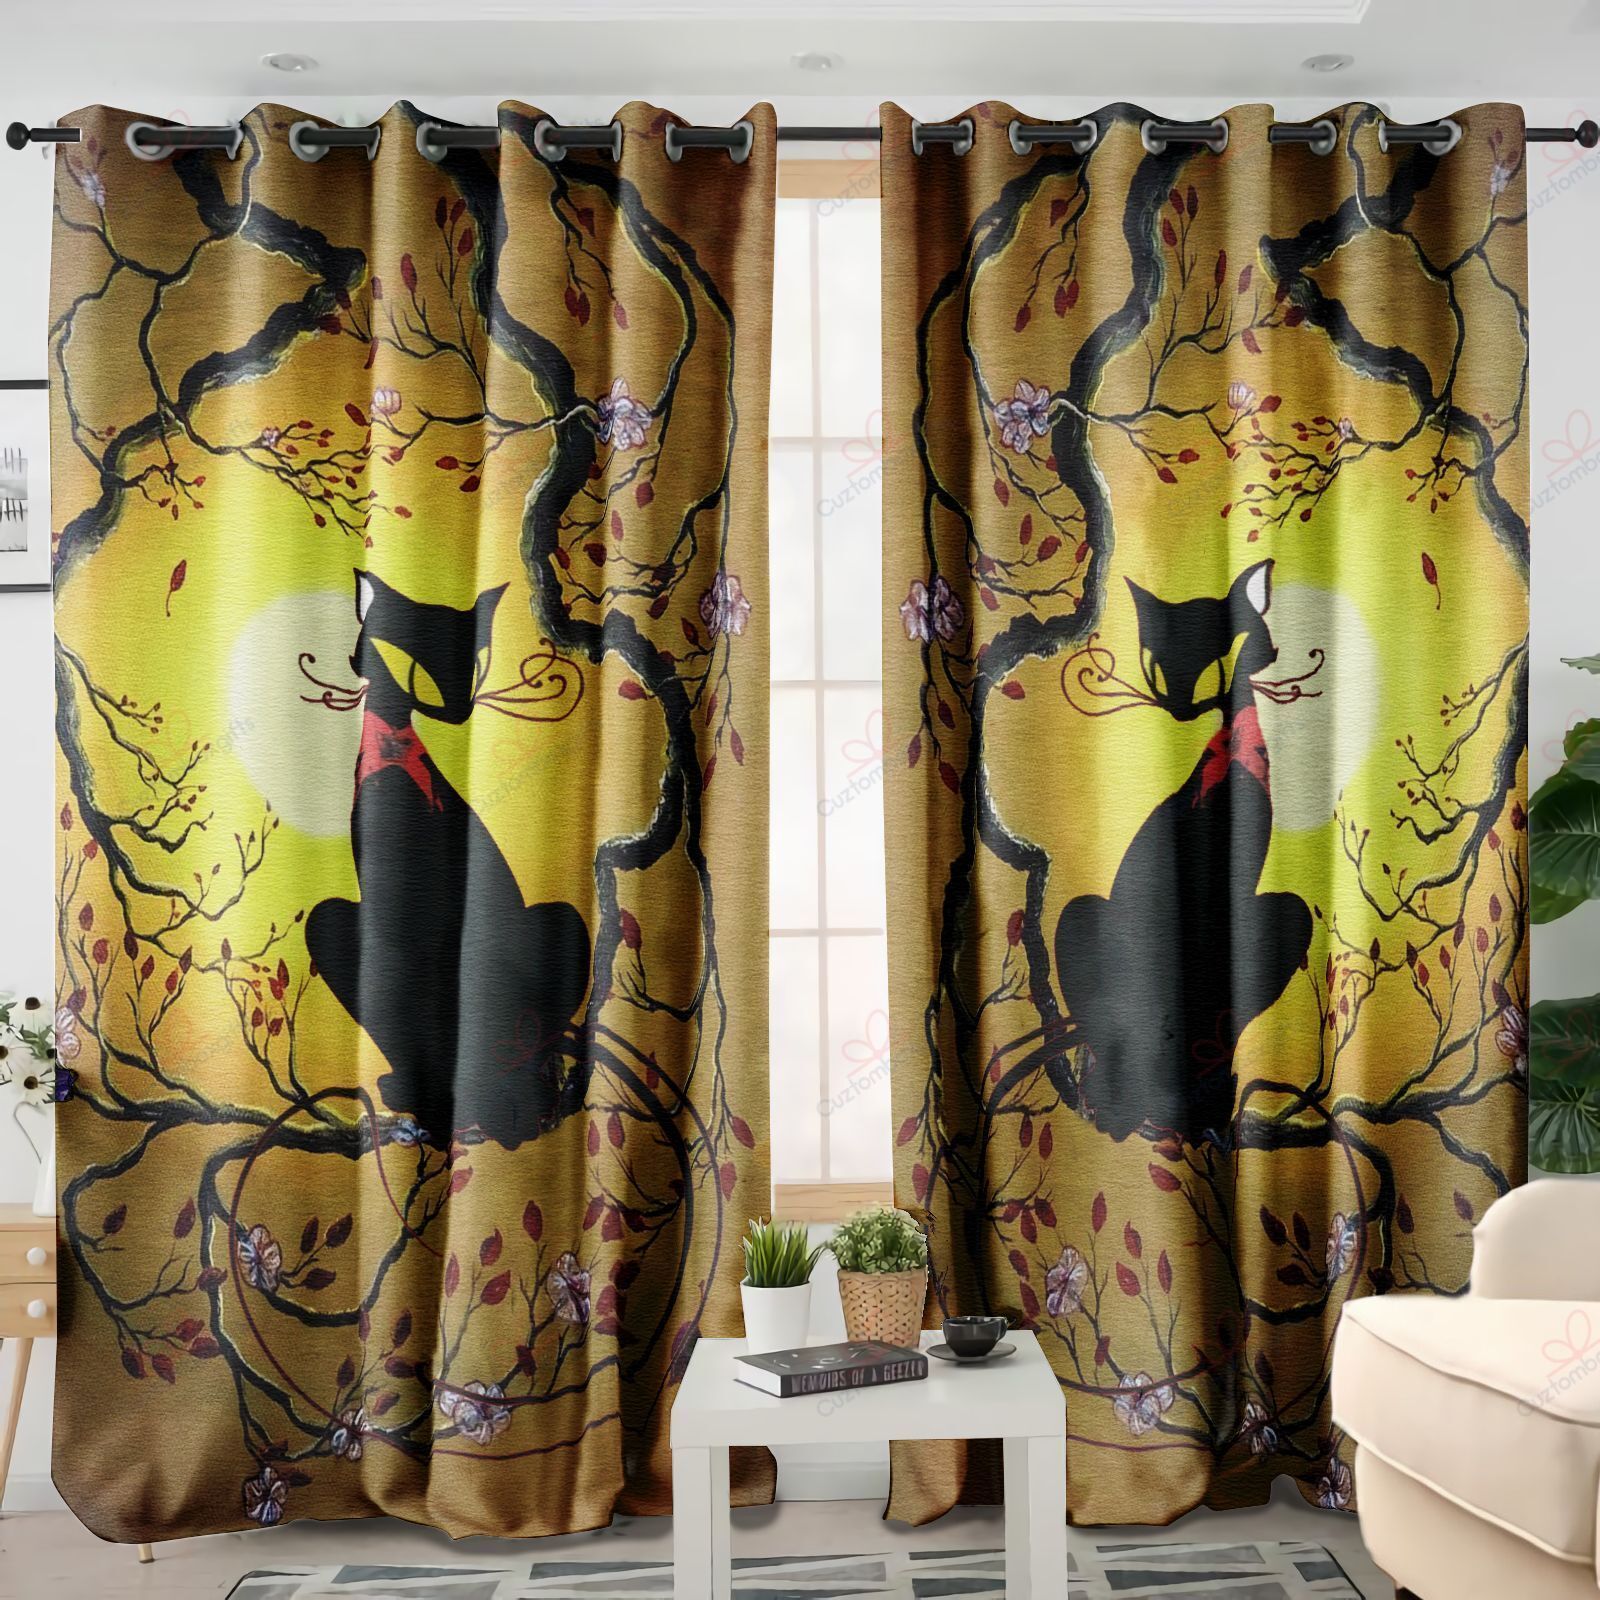 Two Cute Cats Printed Window Curtain Home Decor